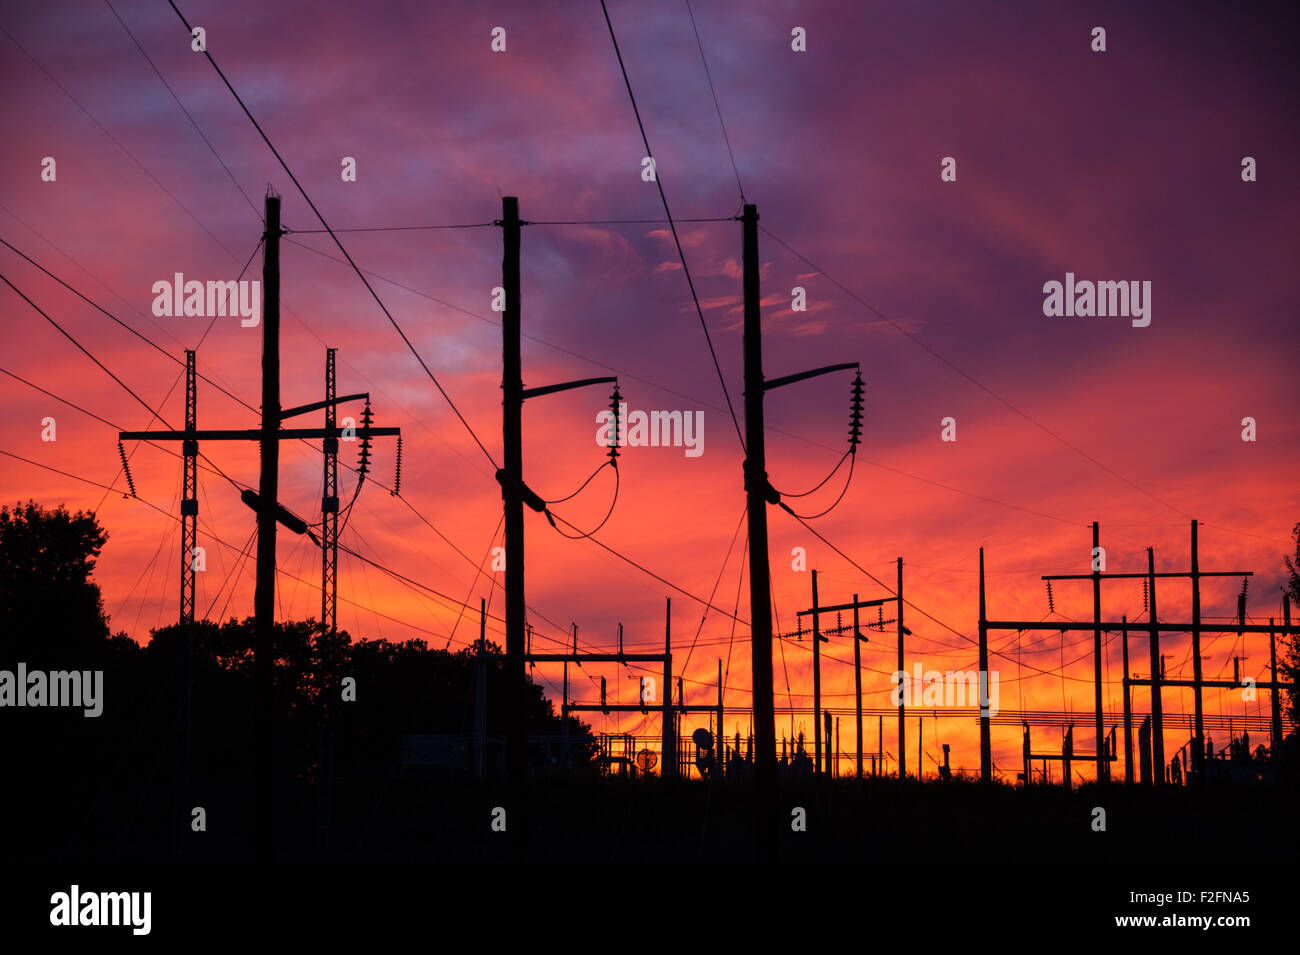 An electrical substation silhouetted against a vivid sunset sky. Stock Photo